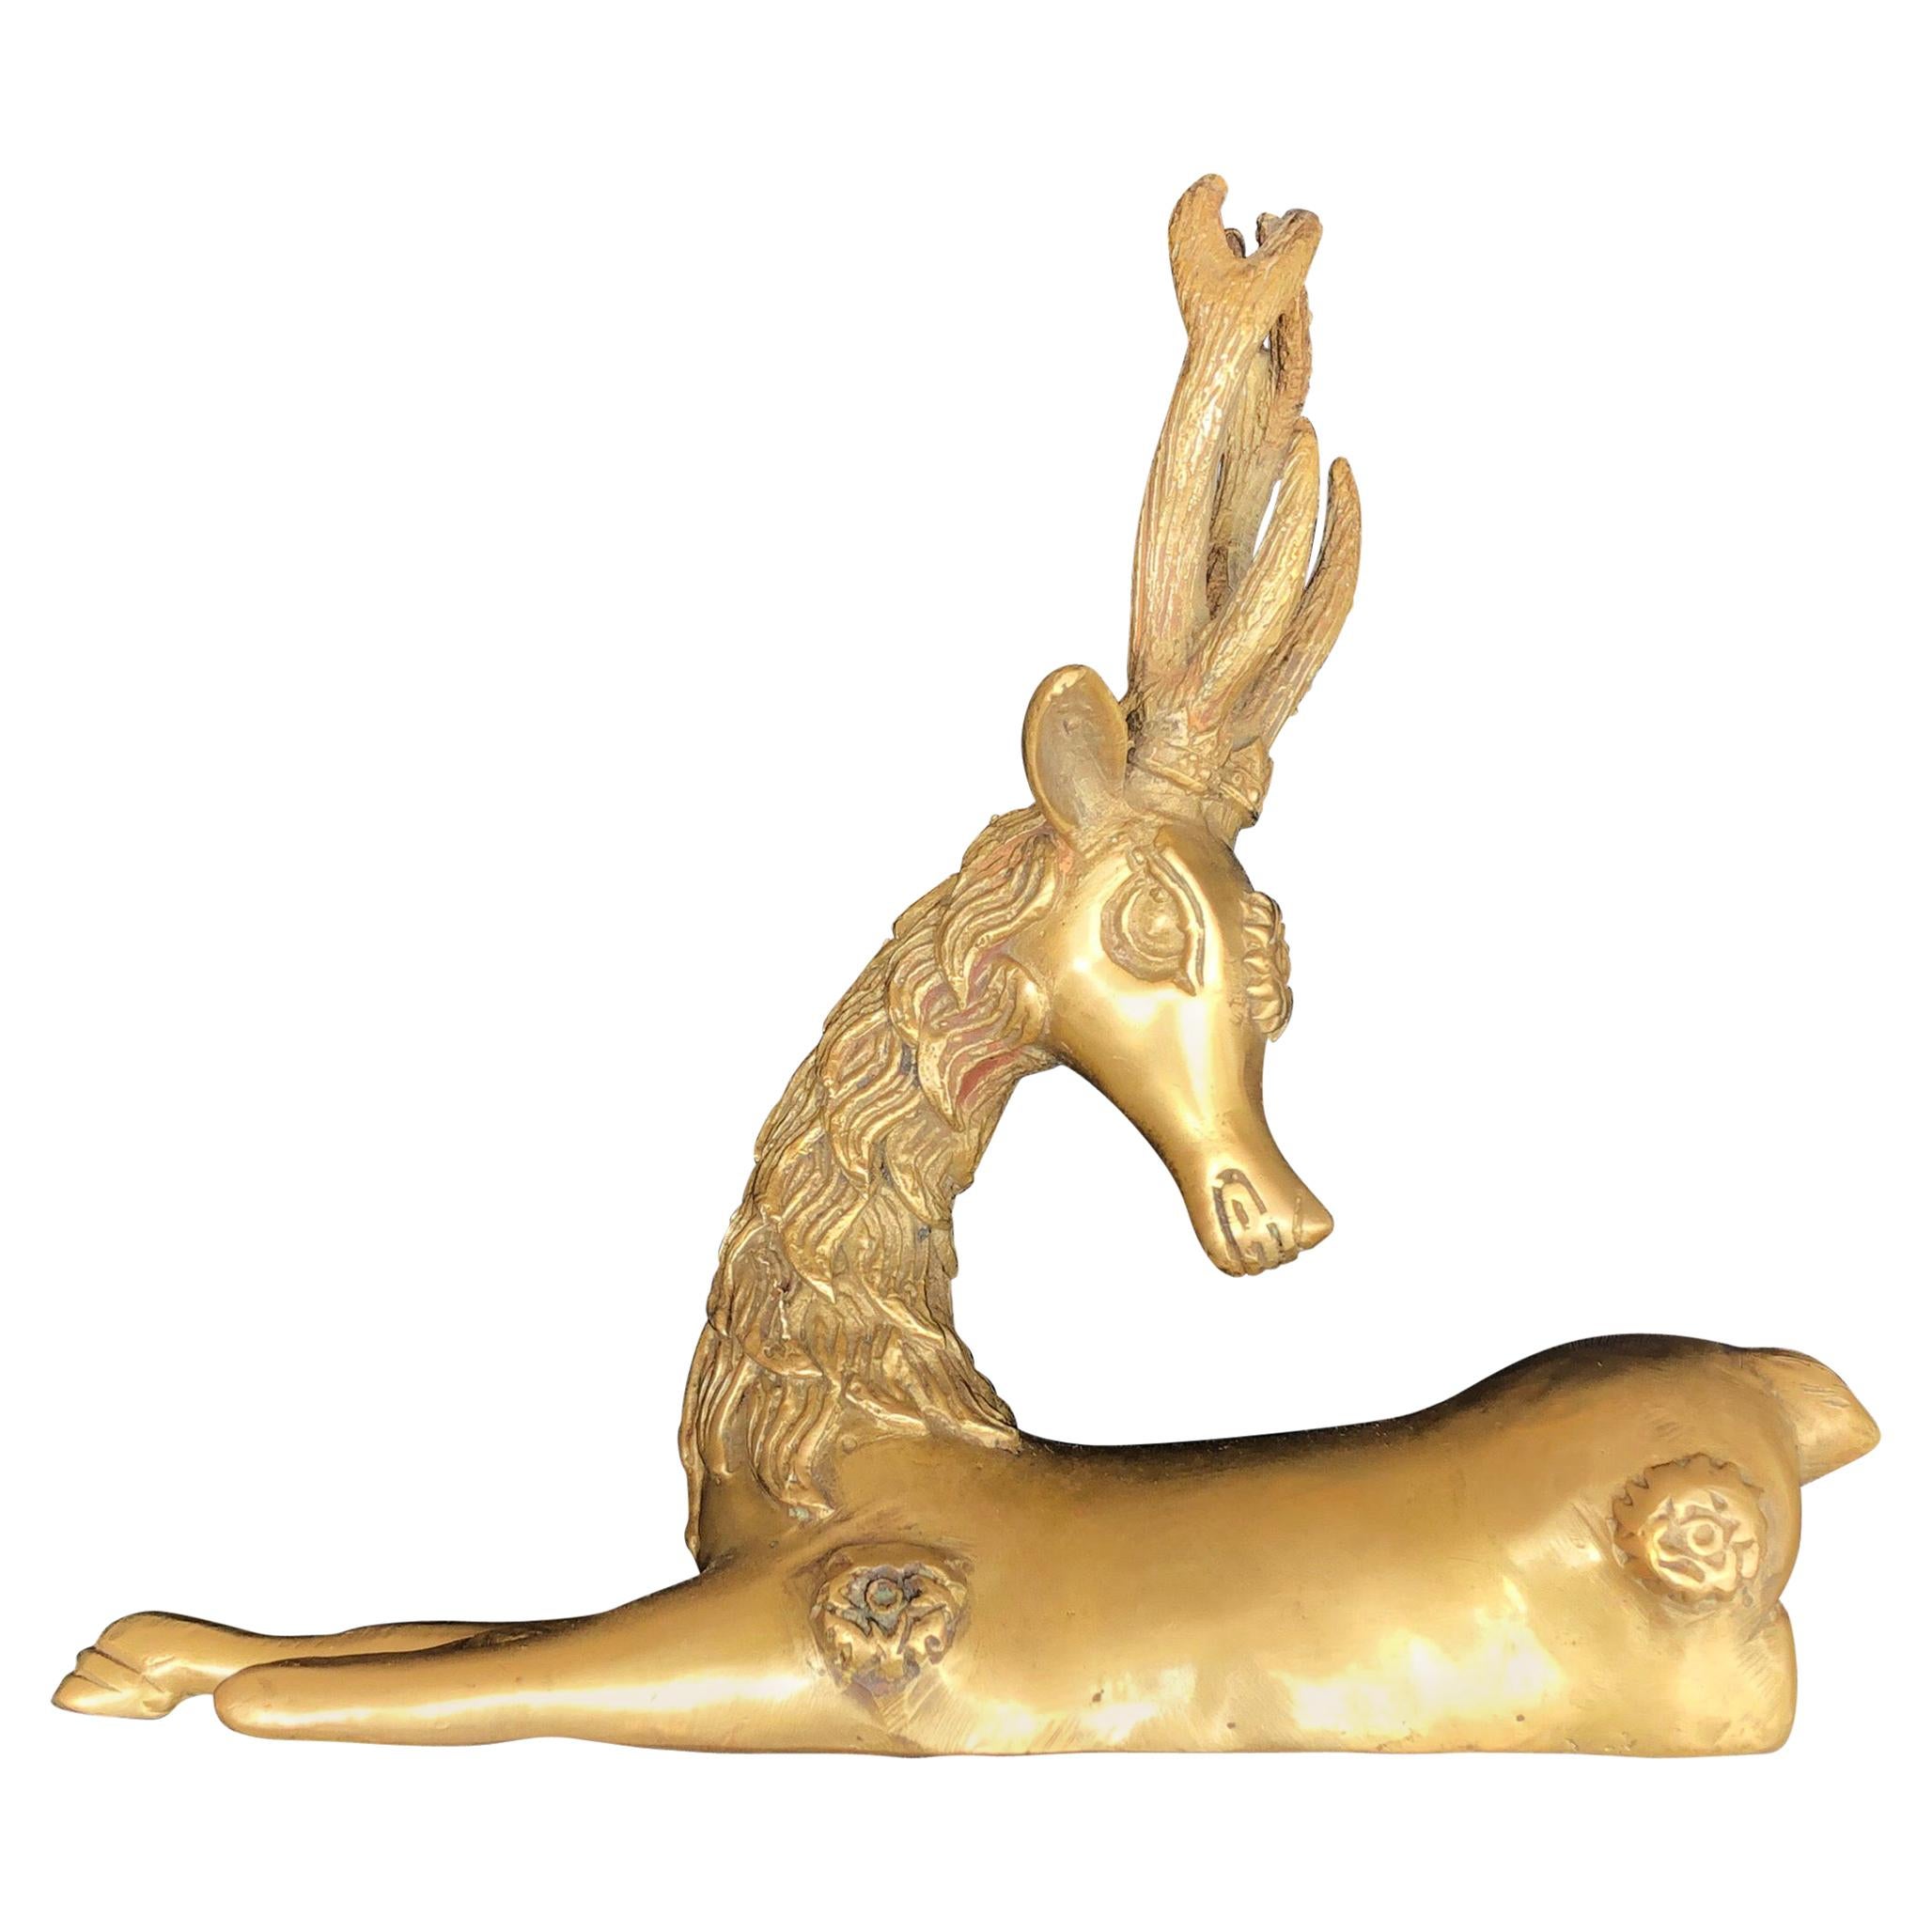 Antique Moroccan Brass Gazelle, Early 1900s Embossed African Animal Sculpture For Sale